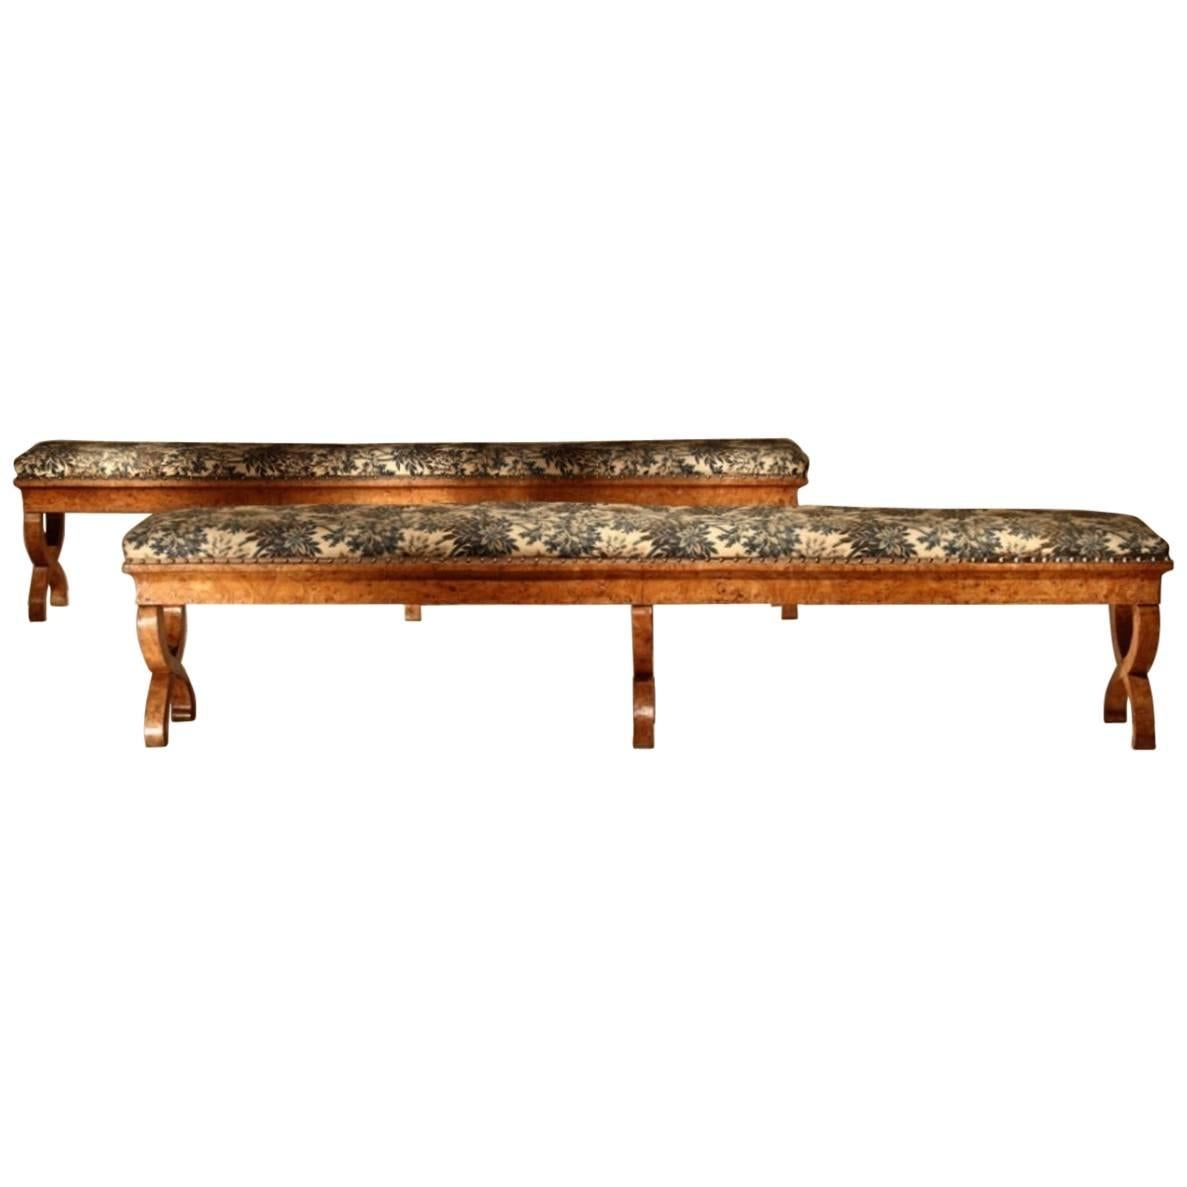 Pair of Early 19th Century Elm Benches